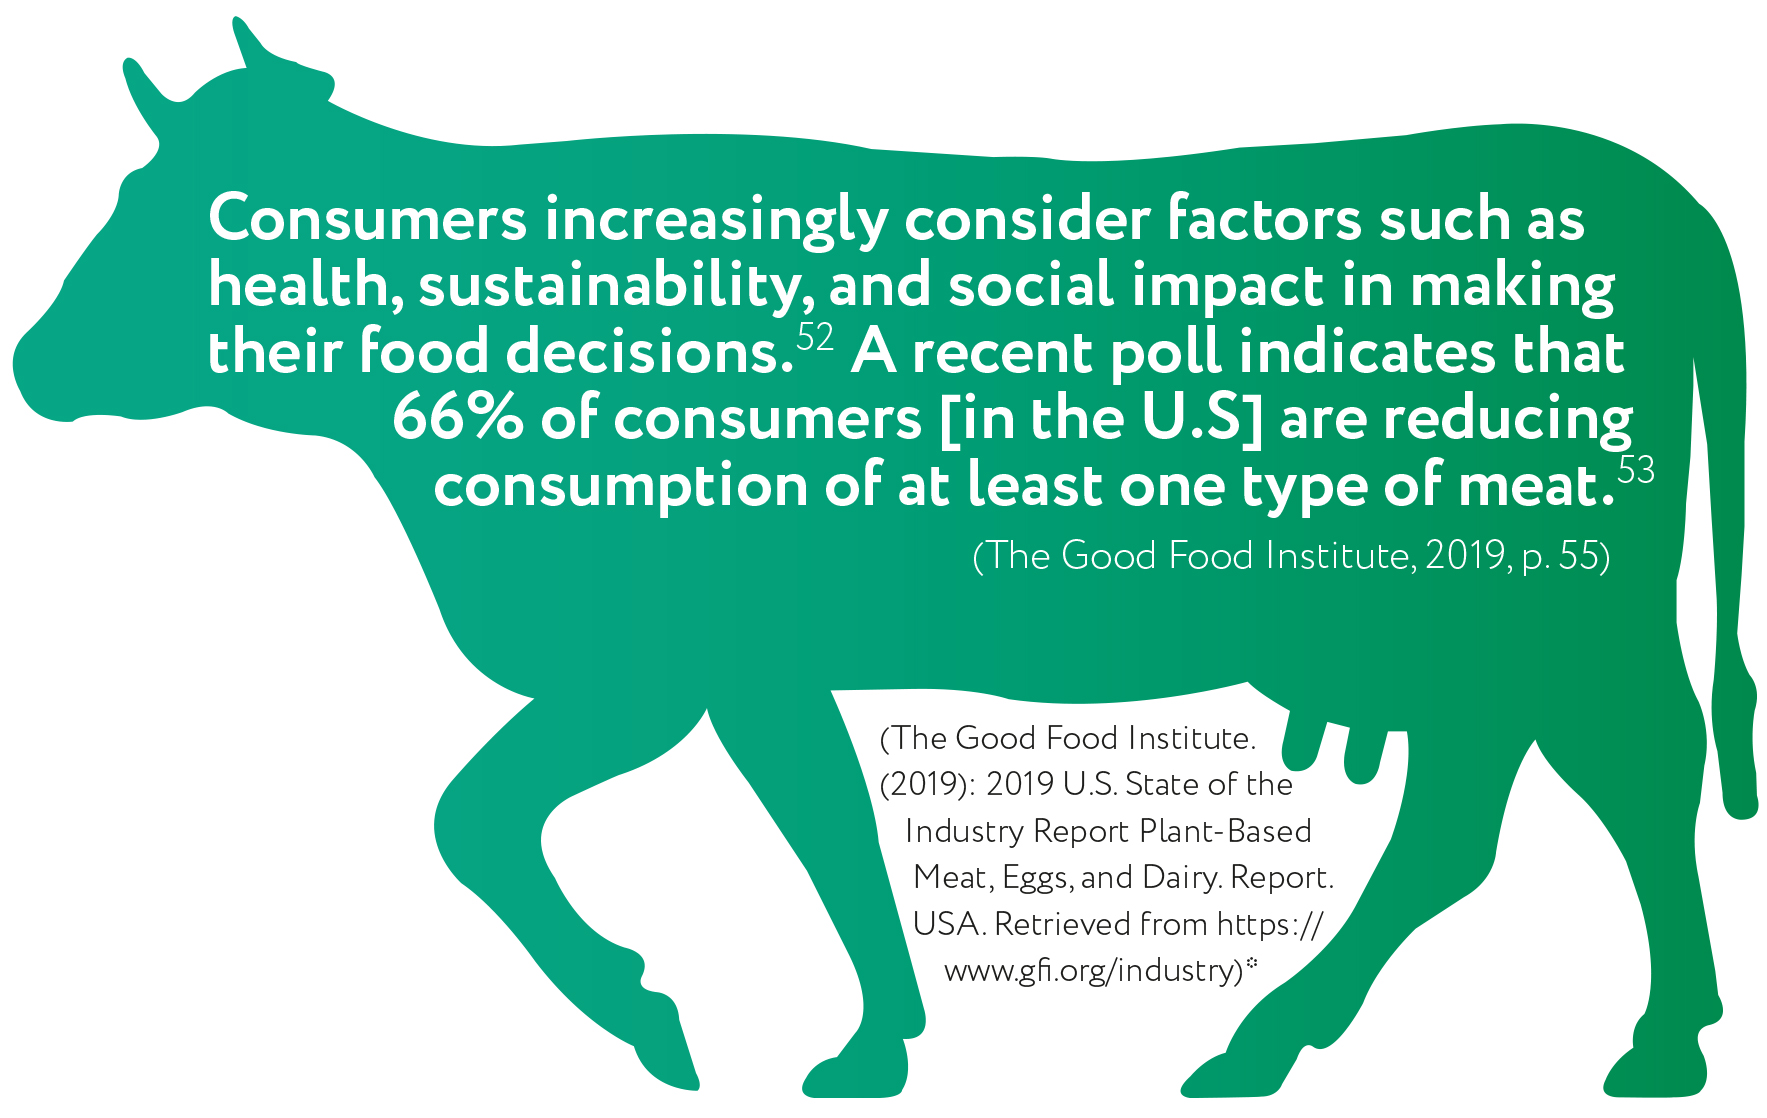 BRCGS plant based trends consumers increasingly Consider factors such as health sustainability, and social impact in making their food decisions. A recent poll indicates that 66% of consumers [in the US] are reducing consumption of at least one type of meat.